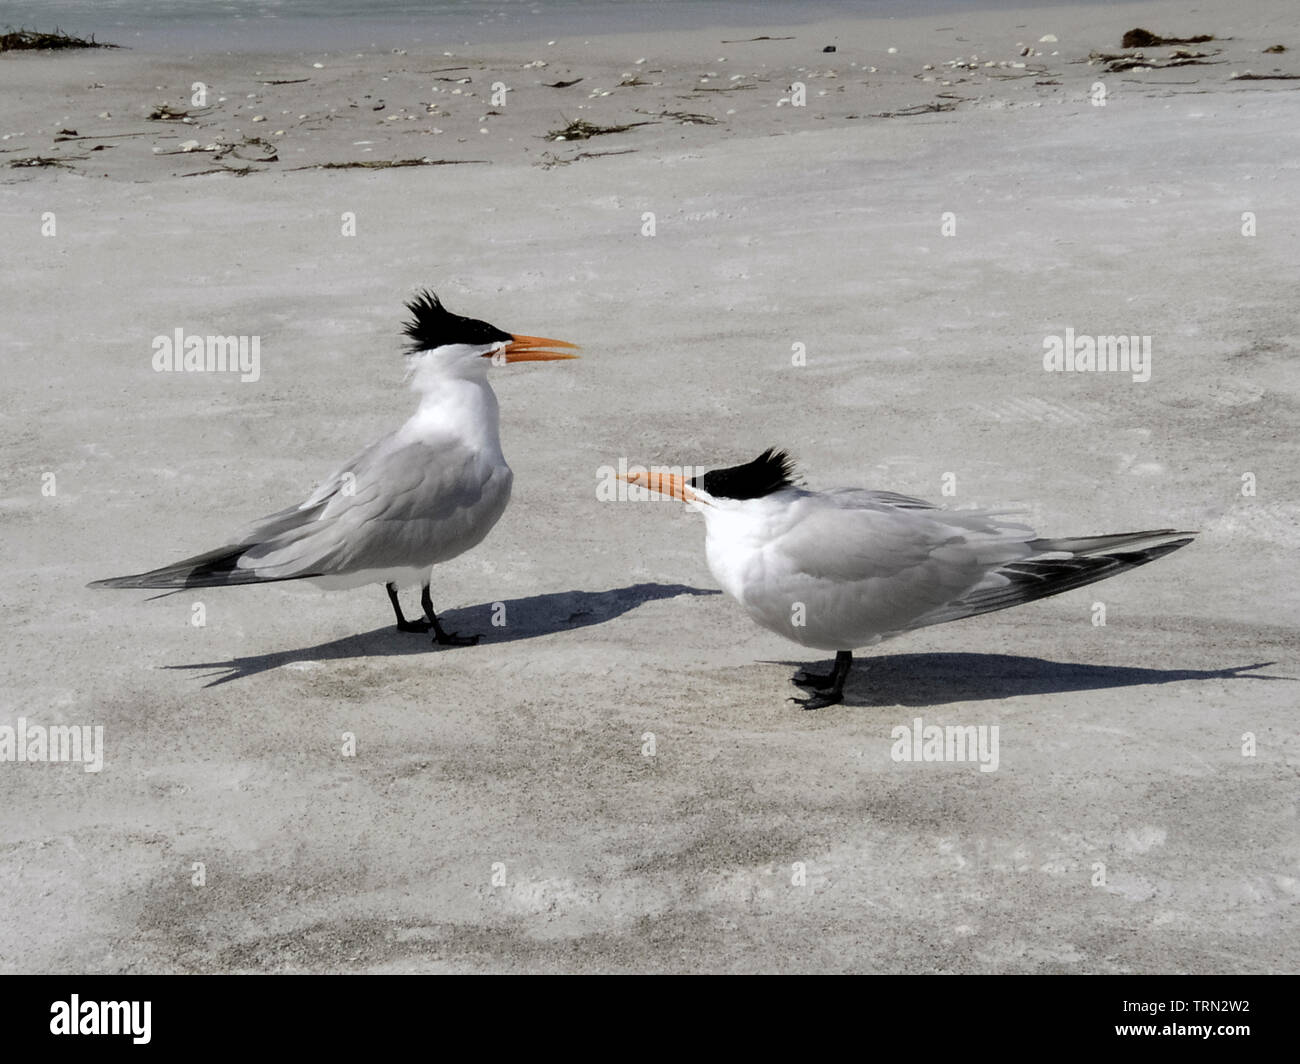 A plump young royal tern (Thalasseus maximus) looks to its mother (left) for food on a sandy beach along the Gulf of Mexico on Longboat Key in Sarasota County, Florida, USA. Until making their first flight four to five weeks after birth, young birds wait on shore for their parents to feed them. Both male and female adults hover over the seawater and then plunge beneath it to bring back fish which they will regurgitate to their single offspring. The parents recognize the particular call of their youngster seeking food and feed only their own young. Stock Photo